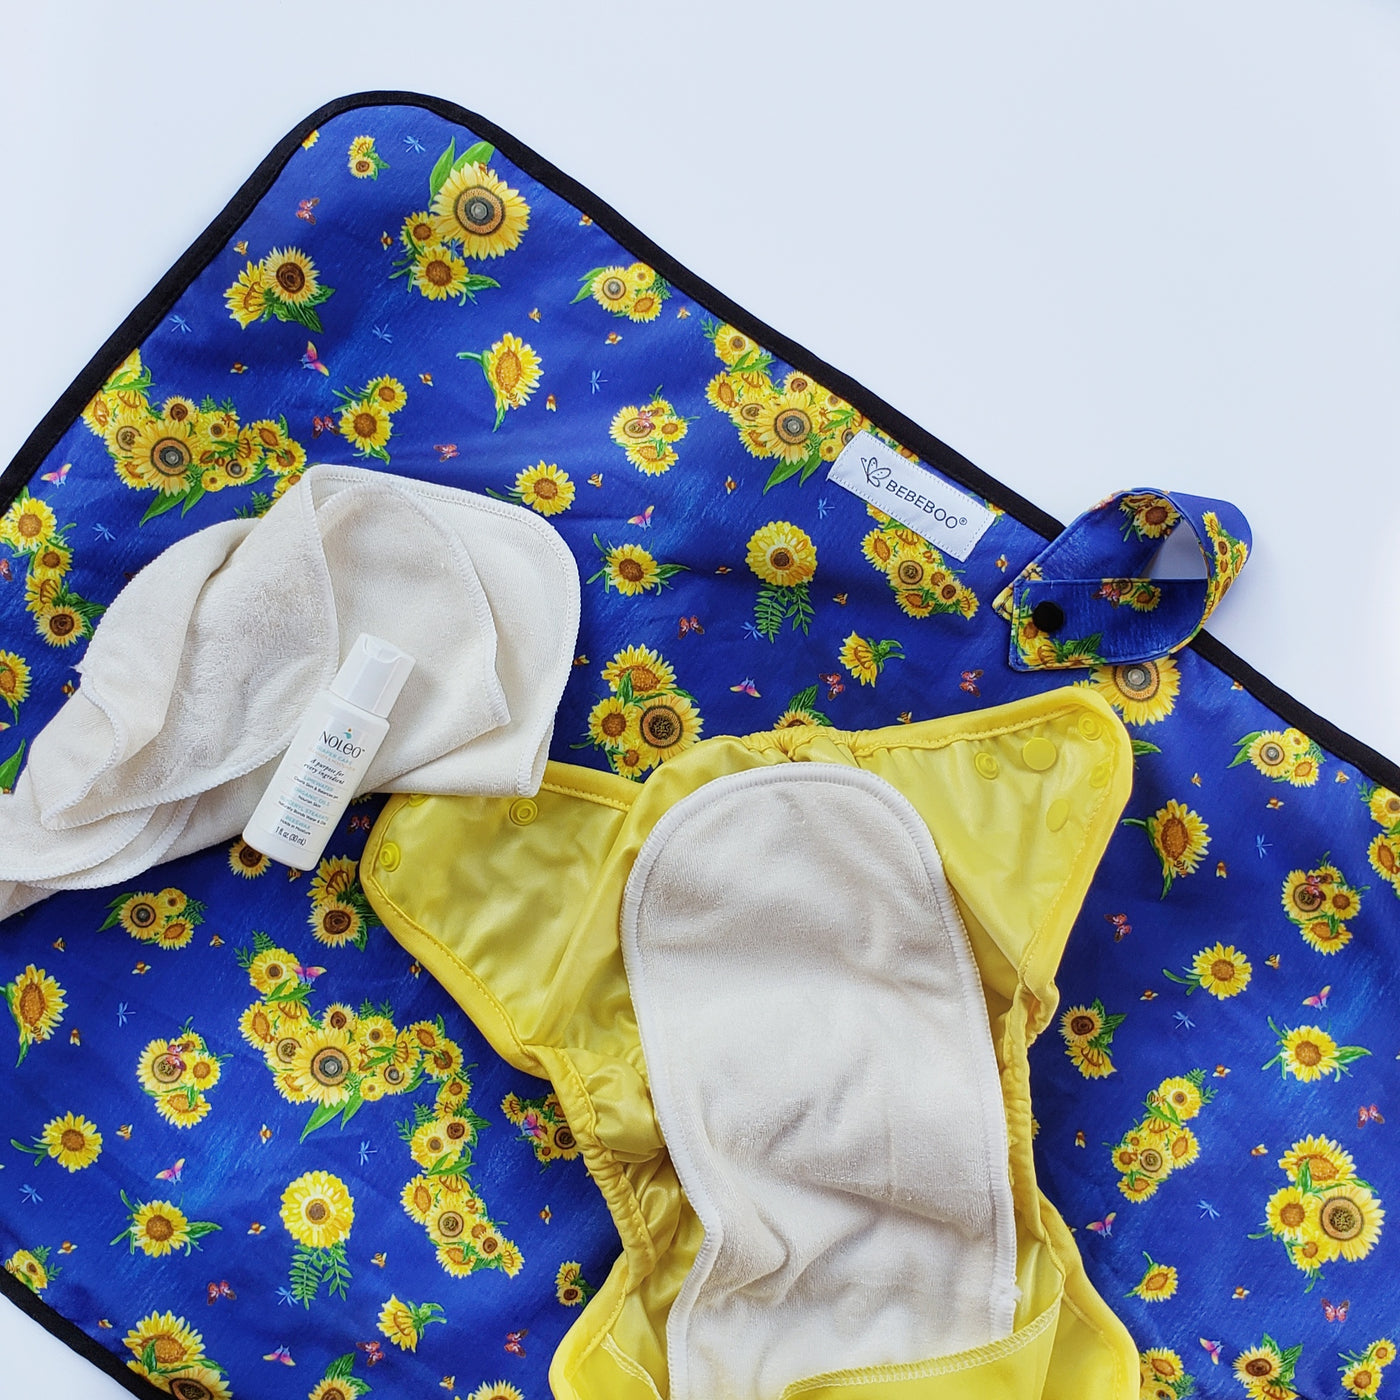 Diaper Change Mat | Here Comes the Sun